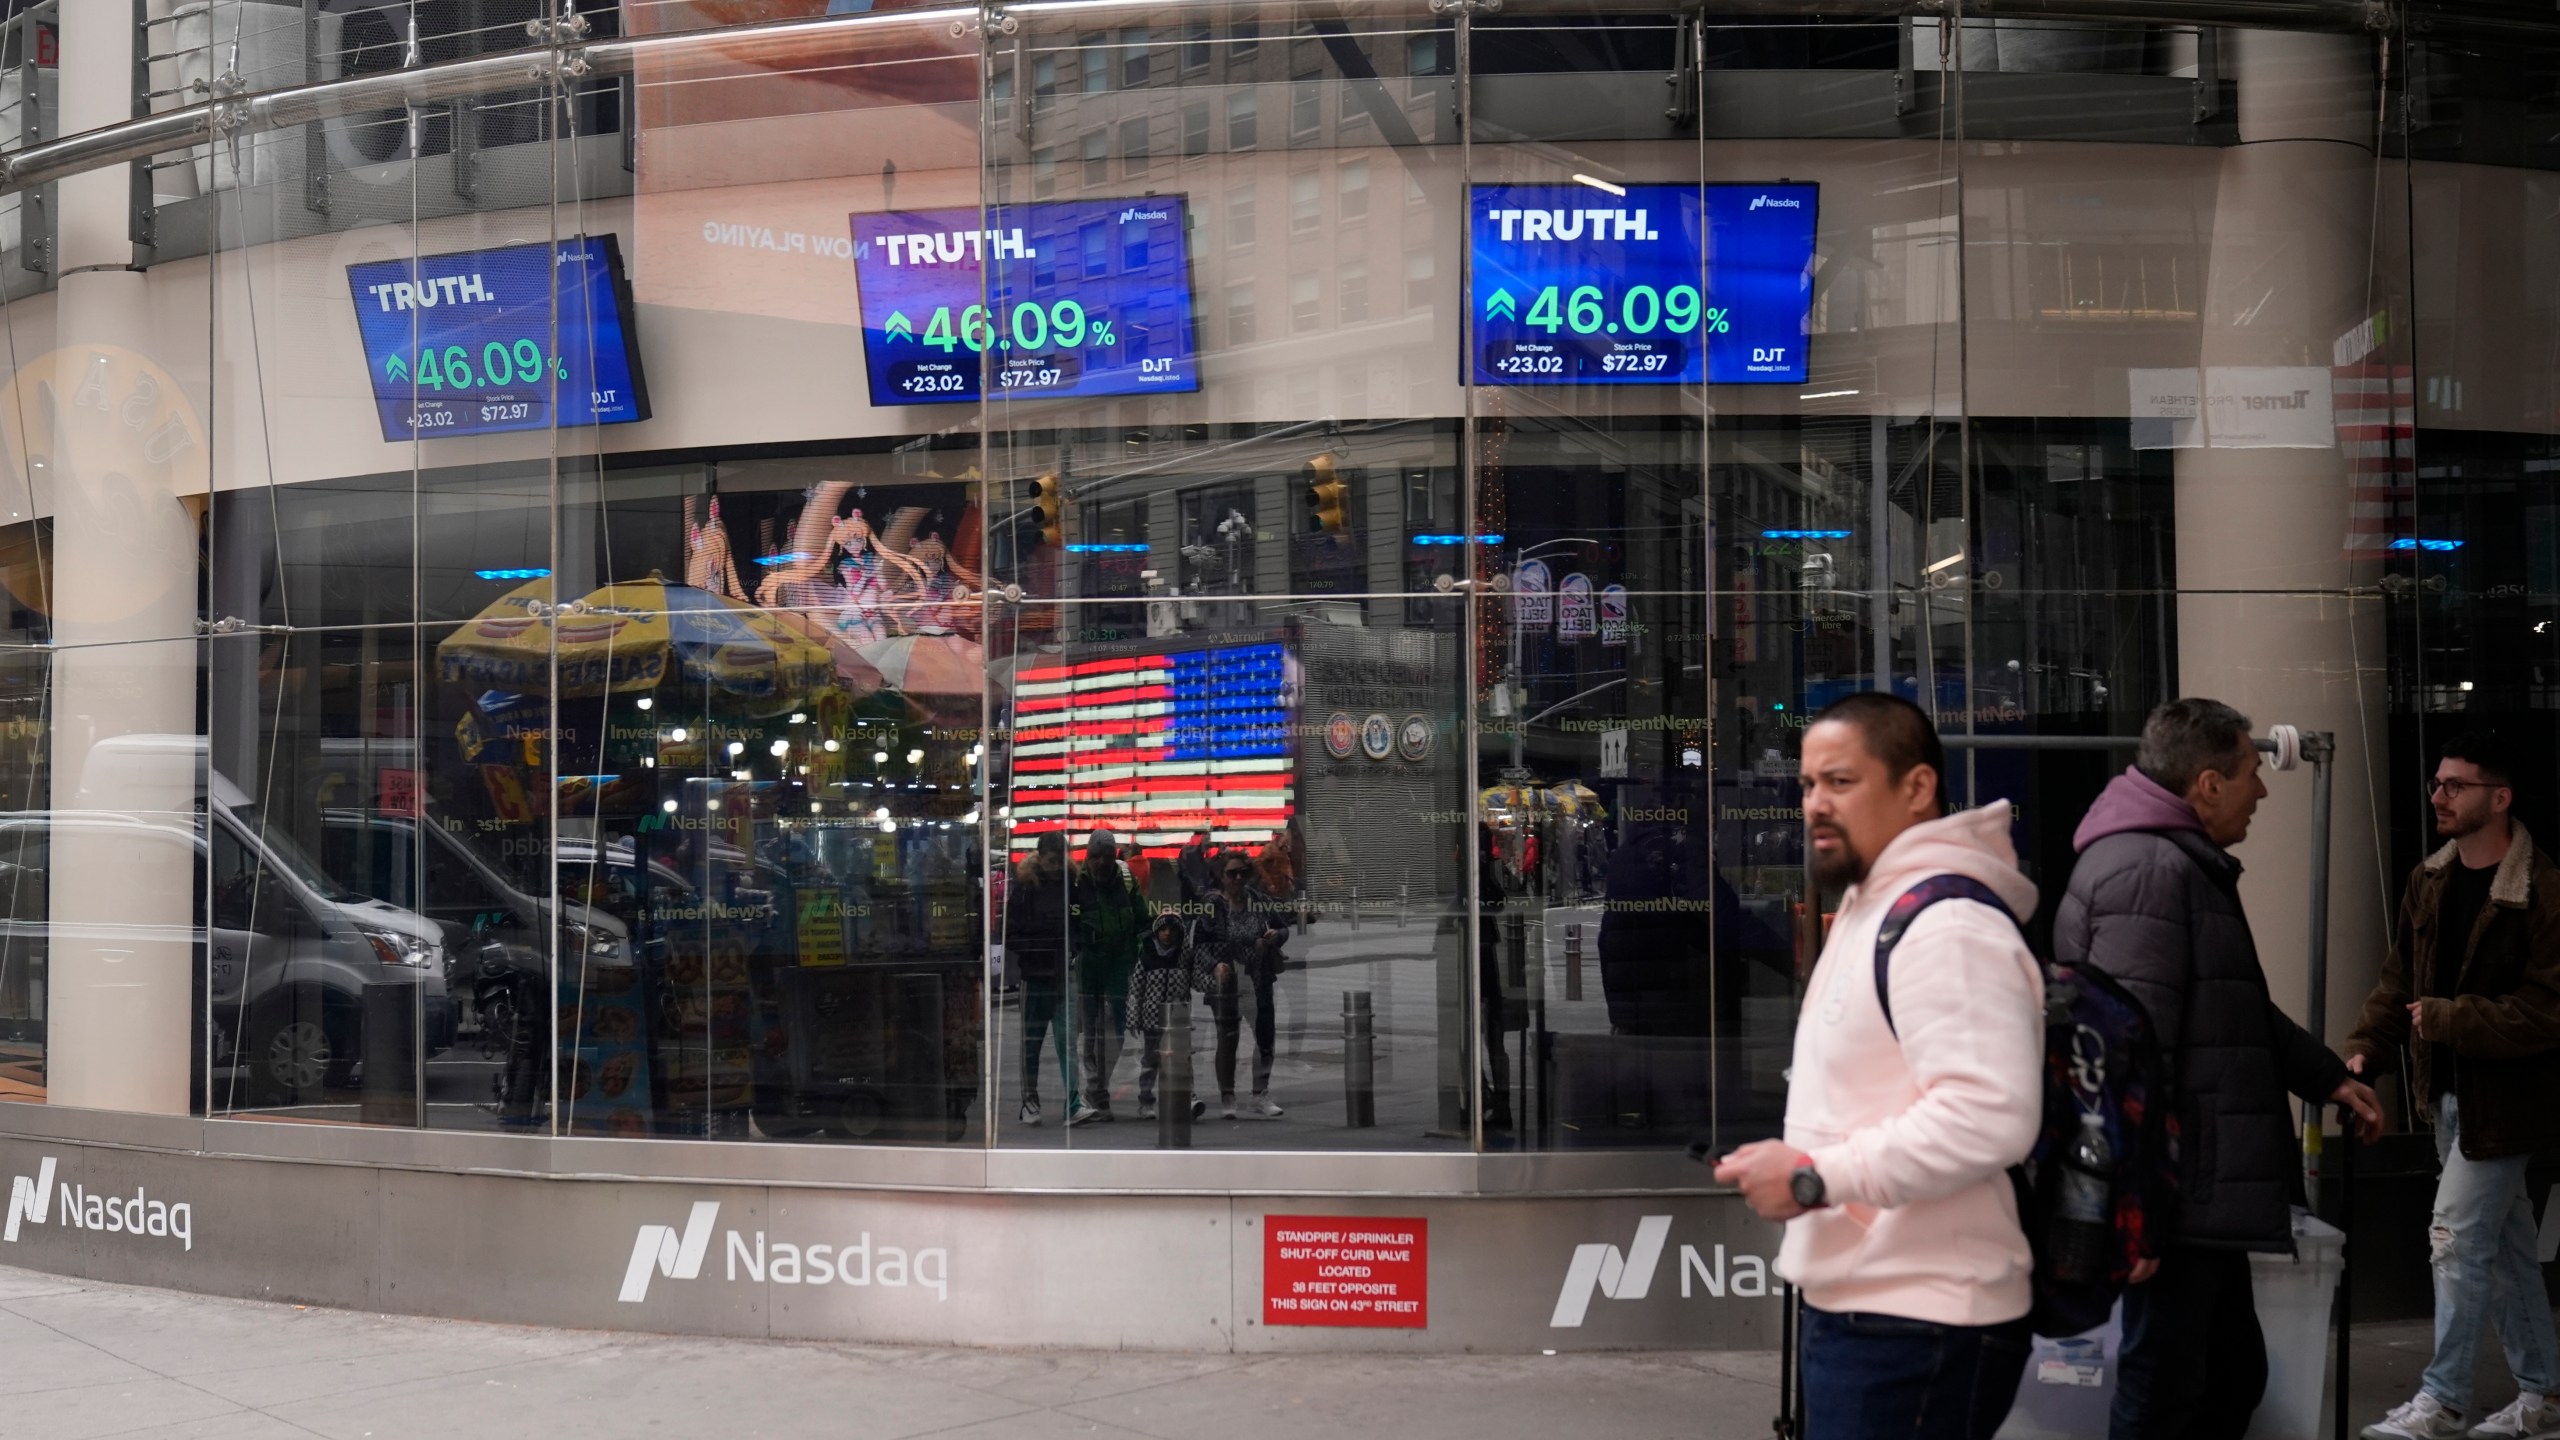 Pedestrians walk past the Nasdaq building Tuesday, March 26, 2024, in New York. Trump Media, which runs the social media platform Truth Social, now takes Digital World's place on the Nasdaq stock exchange. (AP Photo/Frank Franklin II)